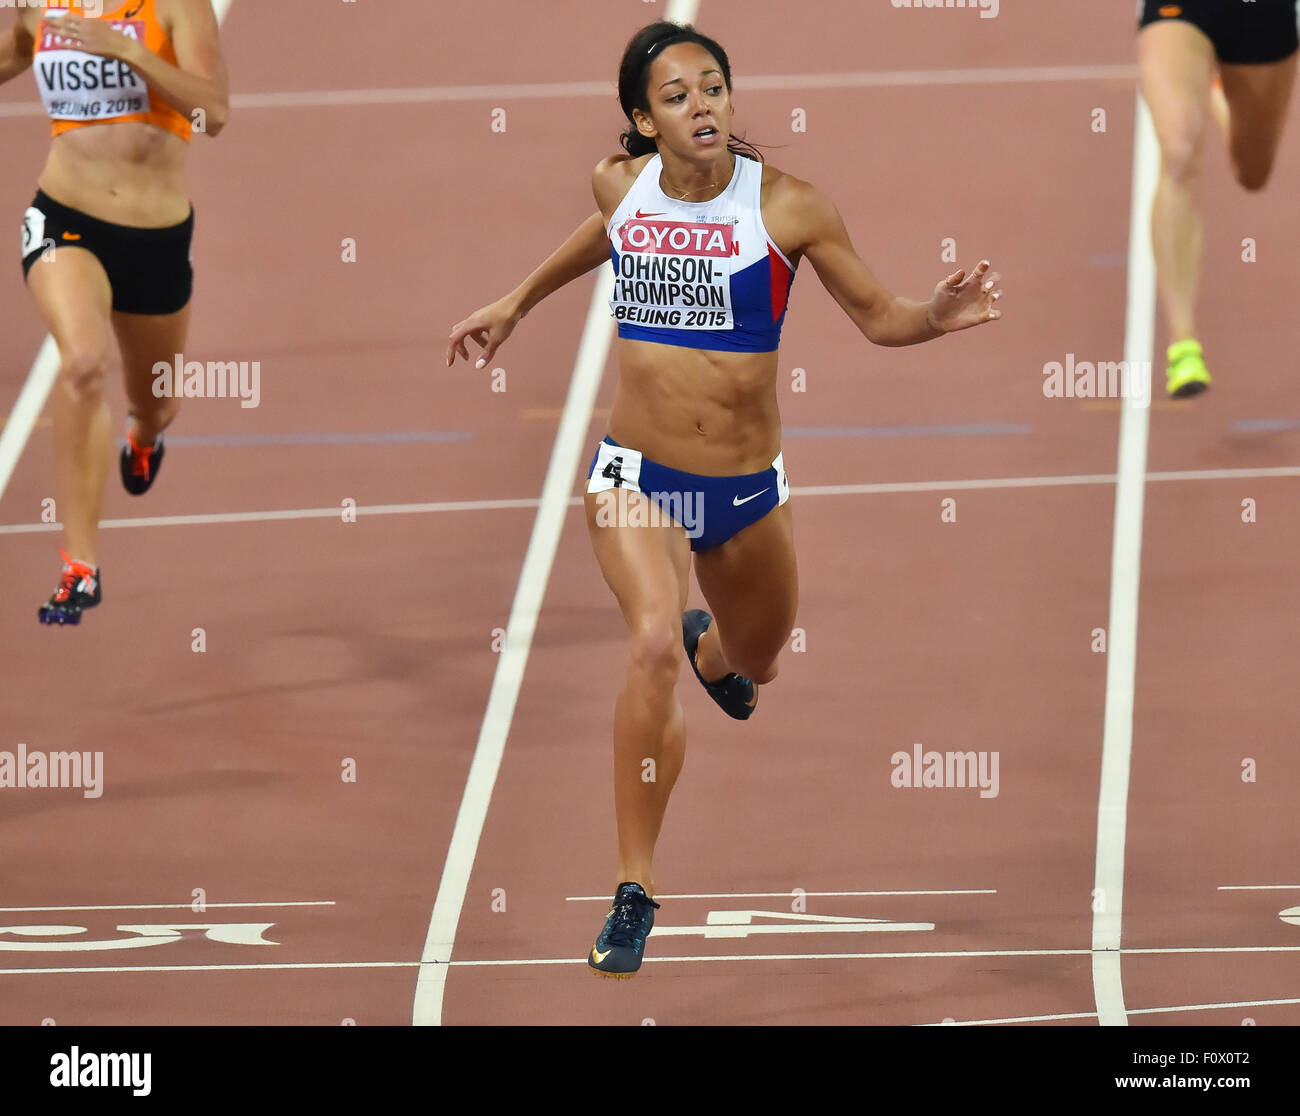 Katarina Johnson-Thompson of Great Britain in the 200m race in the women's heptathlon during day 1 of the 2015 IAAF World Championships at National Stadium on August 22, 2015 in Beijing, China. (Photo by Roger Sedres/Alamy Live News) Stock Photo